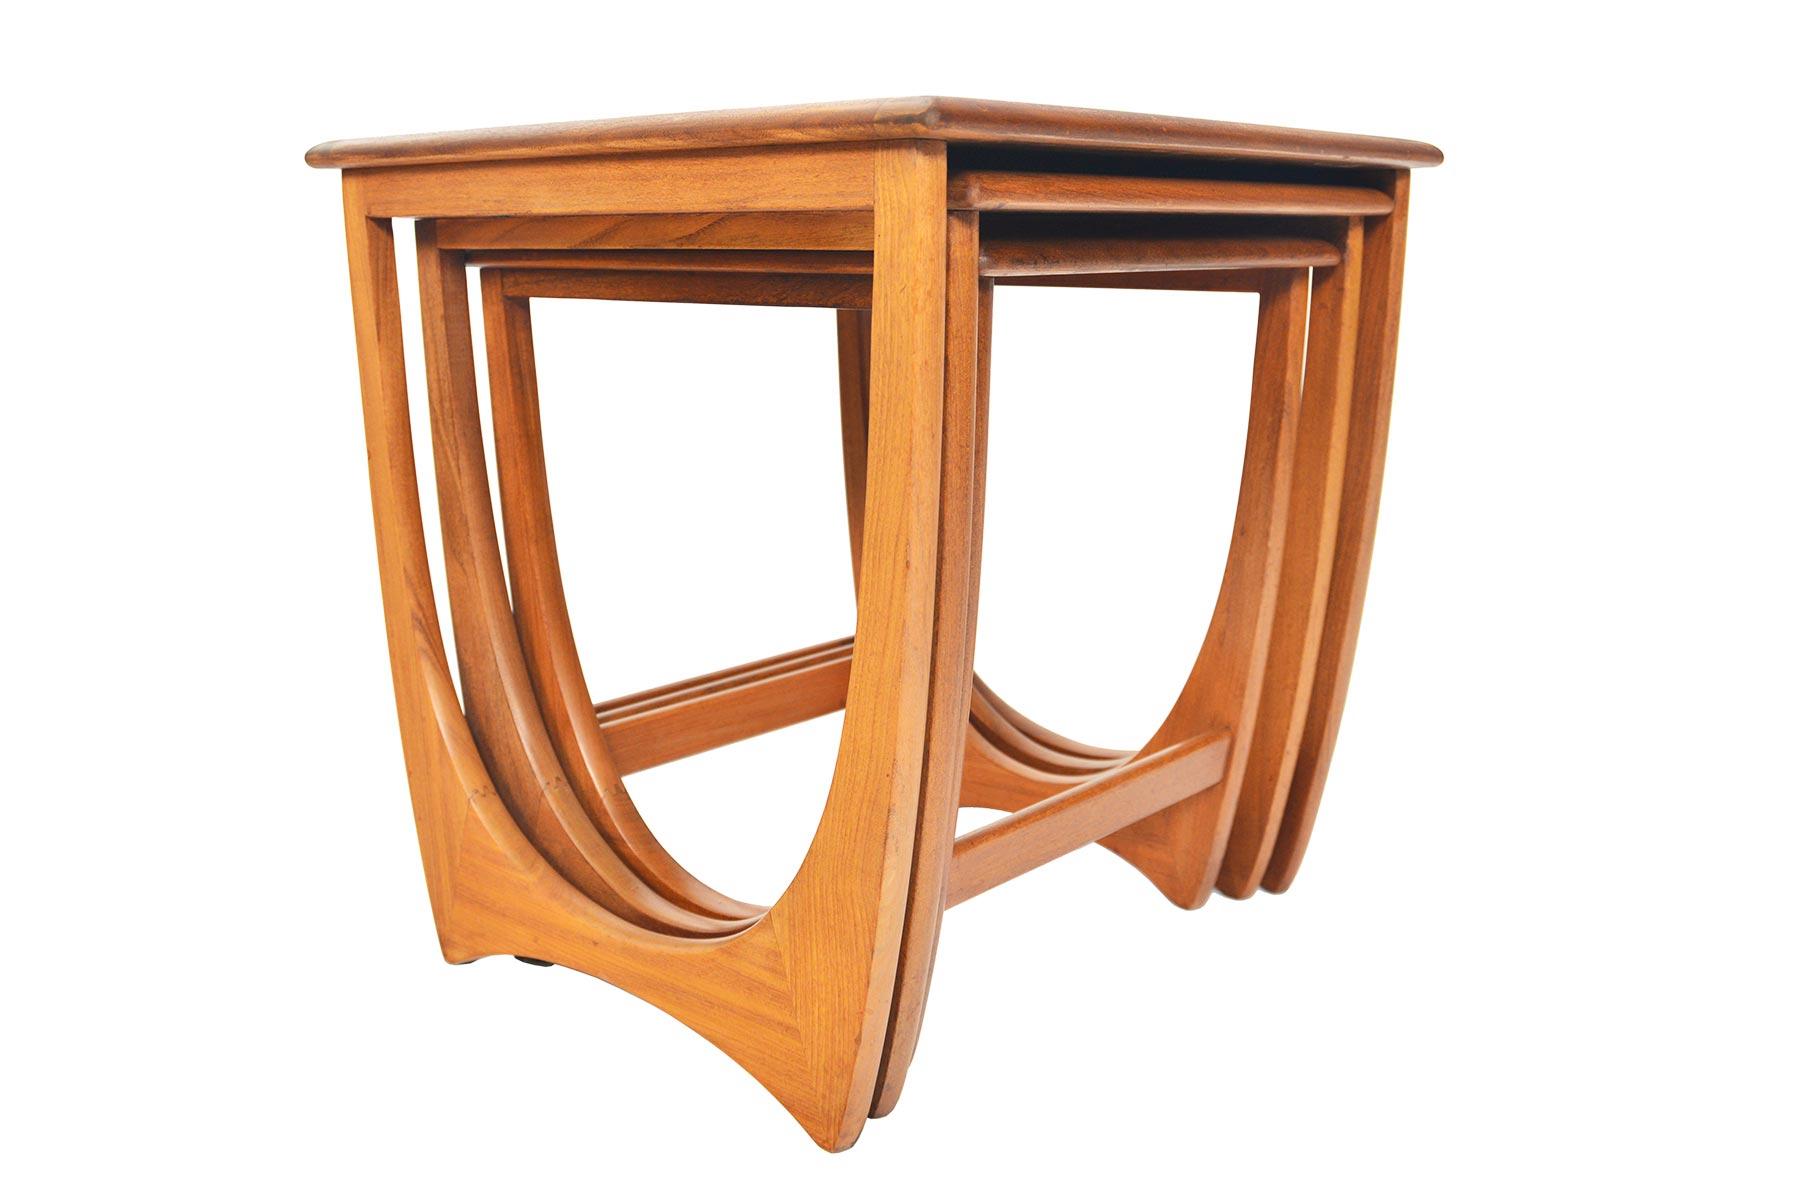 This timeless set of Mid-Century Modern G Plan Astro teak nesting tables was designed by Victor Wilkins in the 1960s. Gorgeous design and exceptional construction throughout. Recently refinished and in excellent condition.